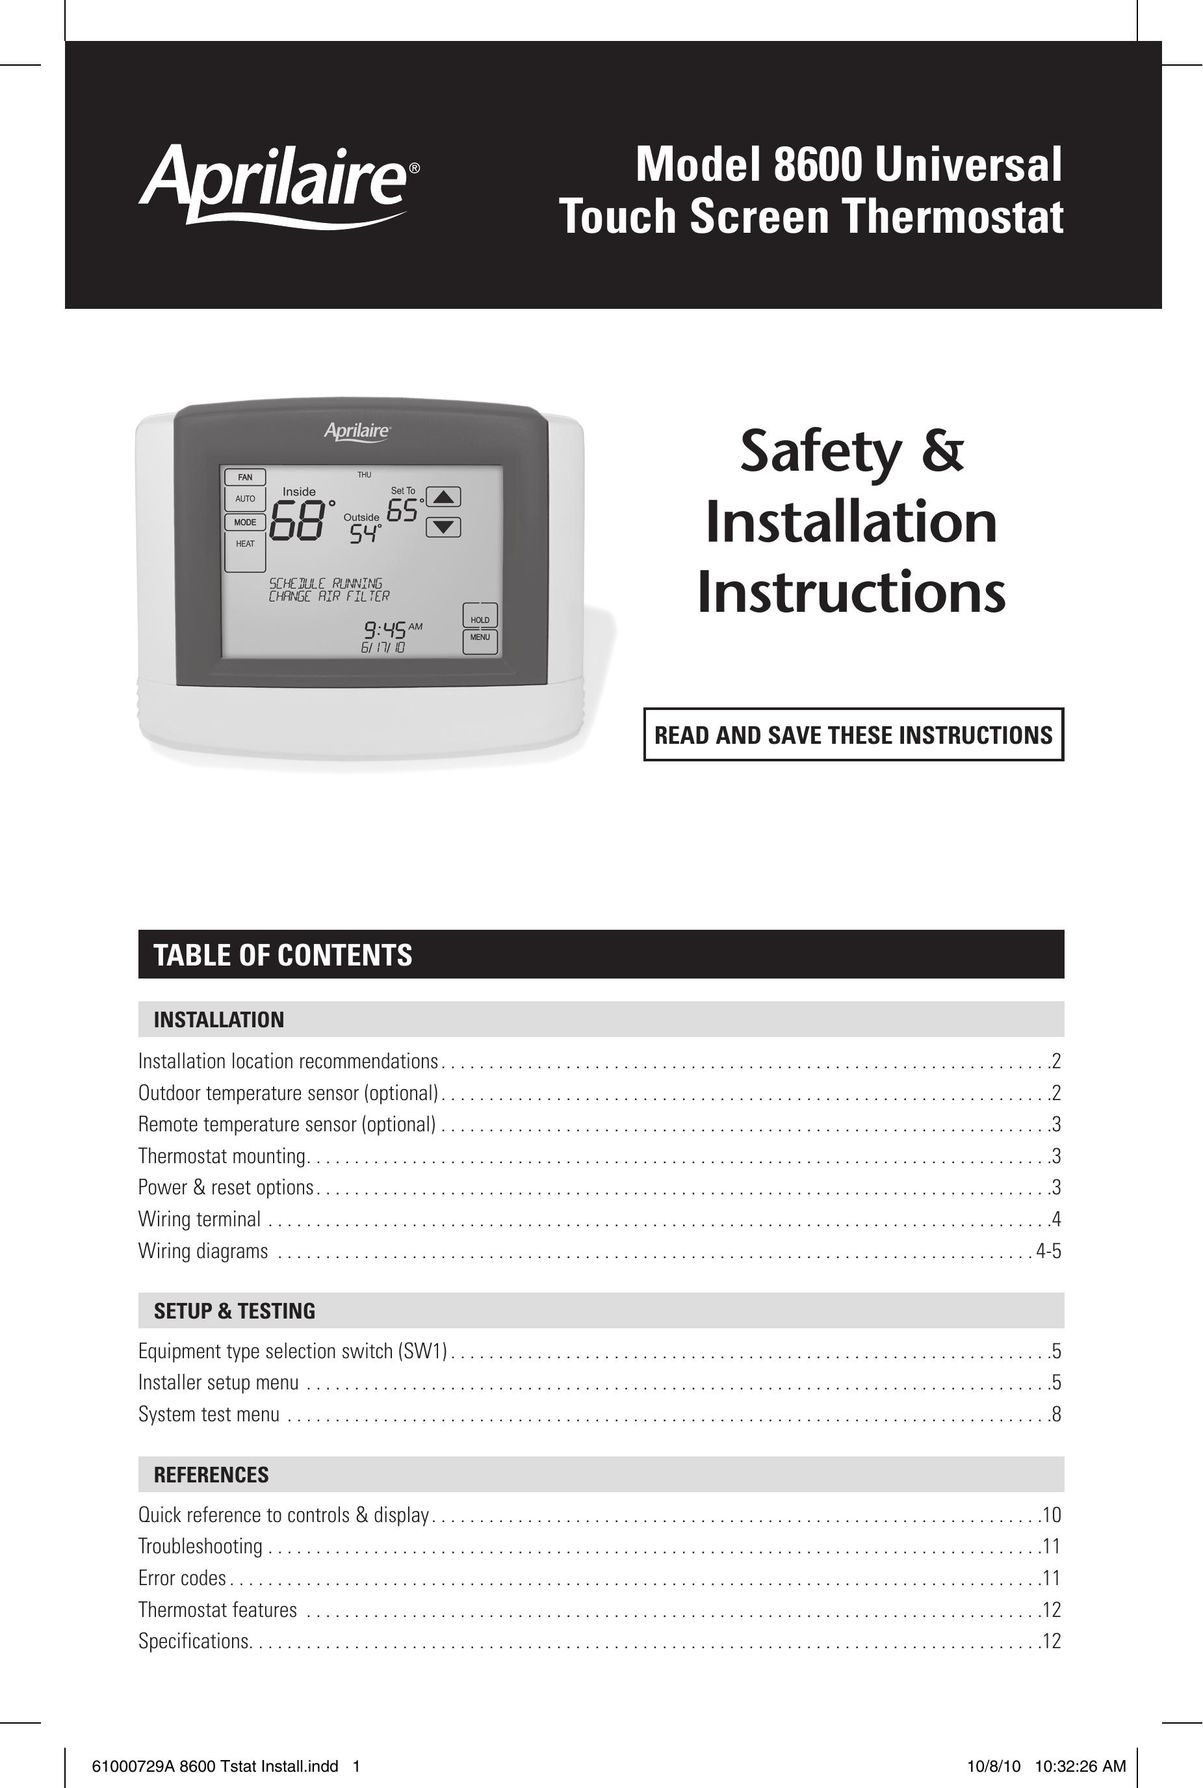 Aprilaire 8600 Thermostat User Manual